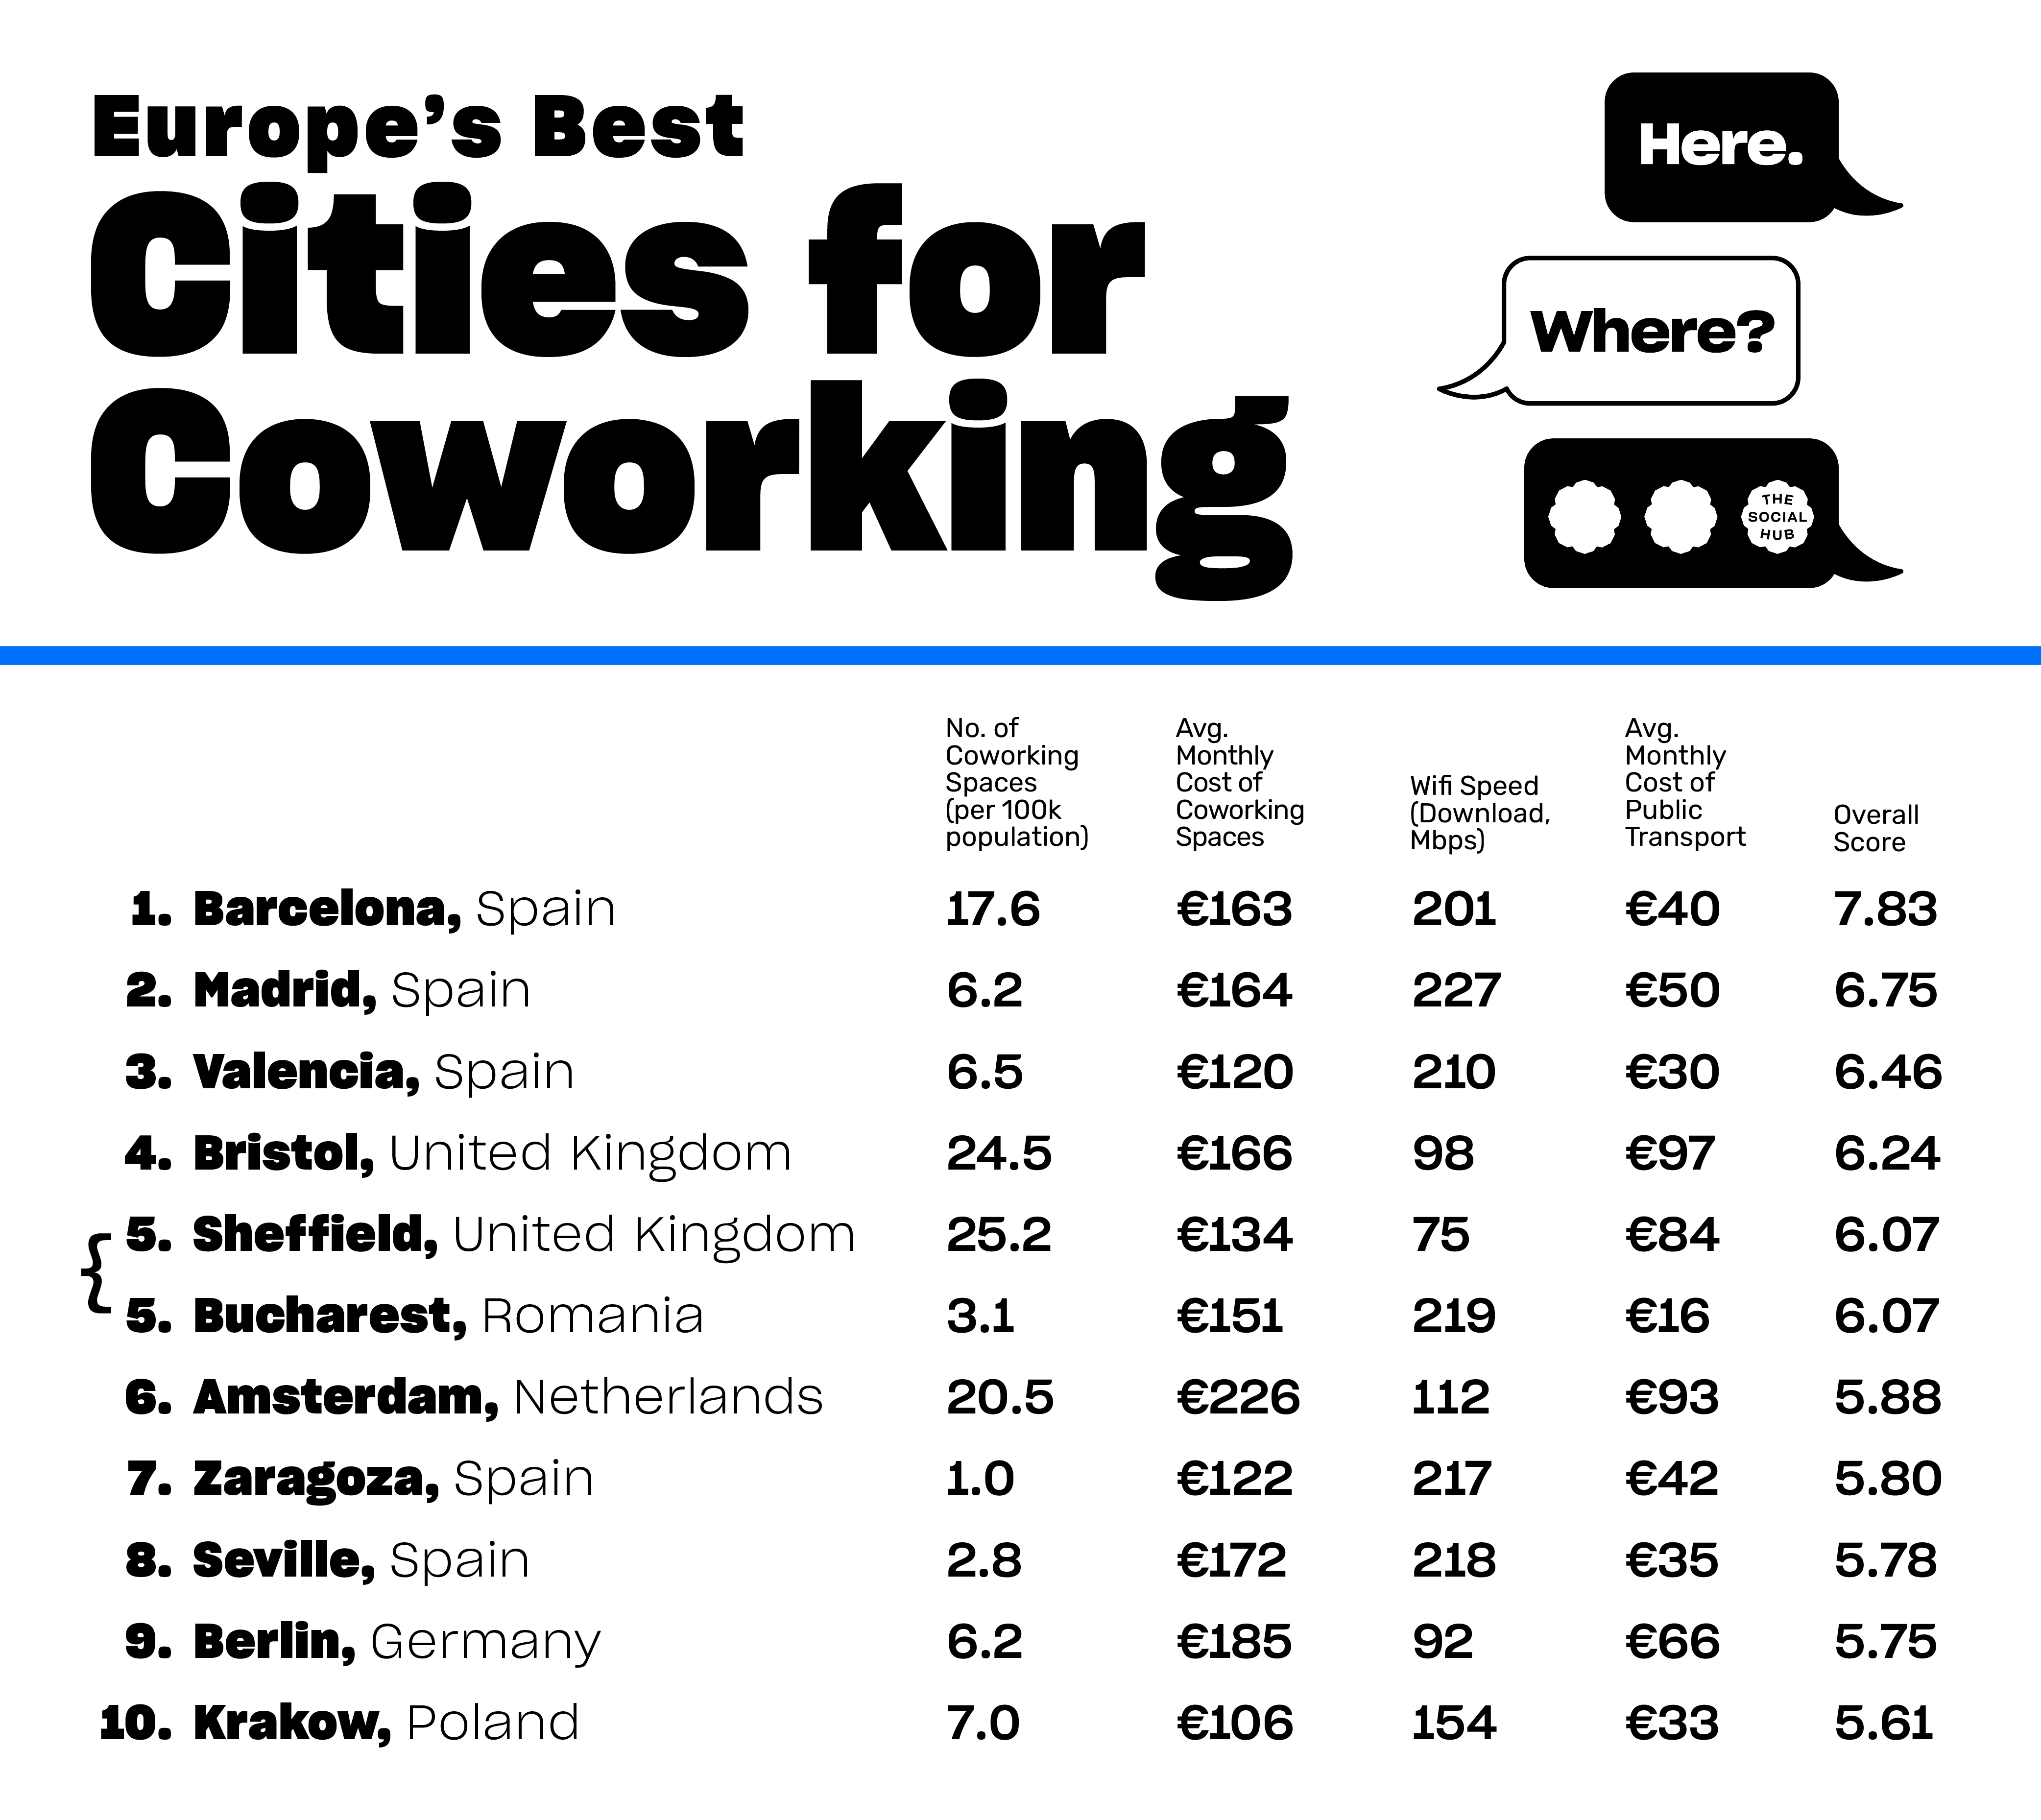 Top 10 list of Europe's best cities for Coworking